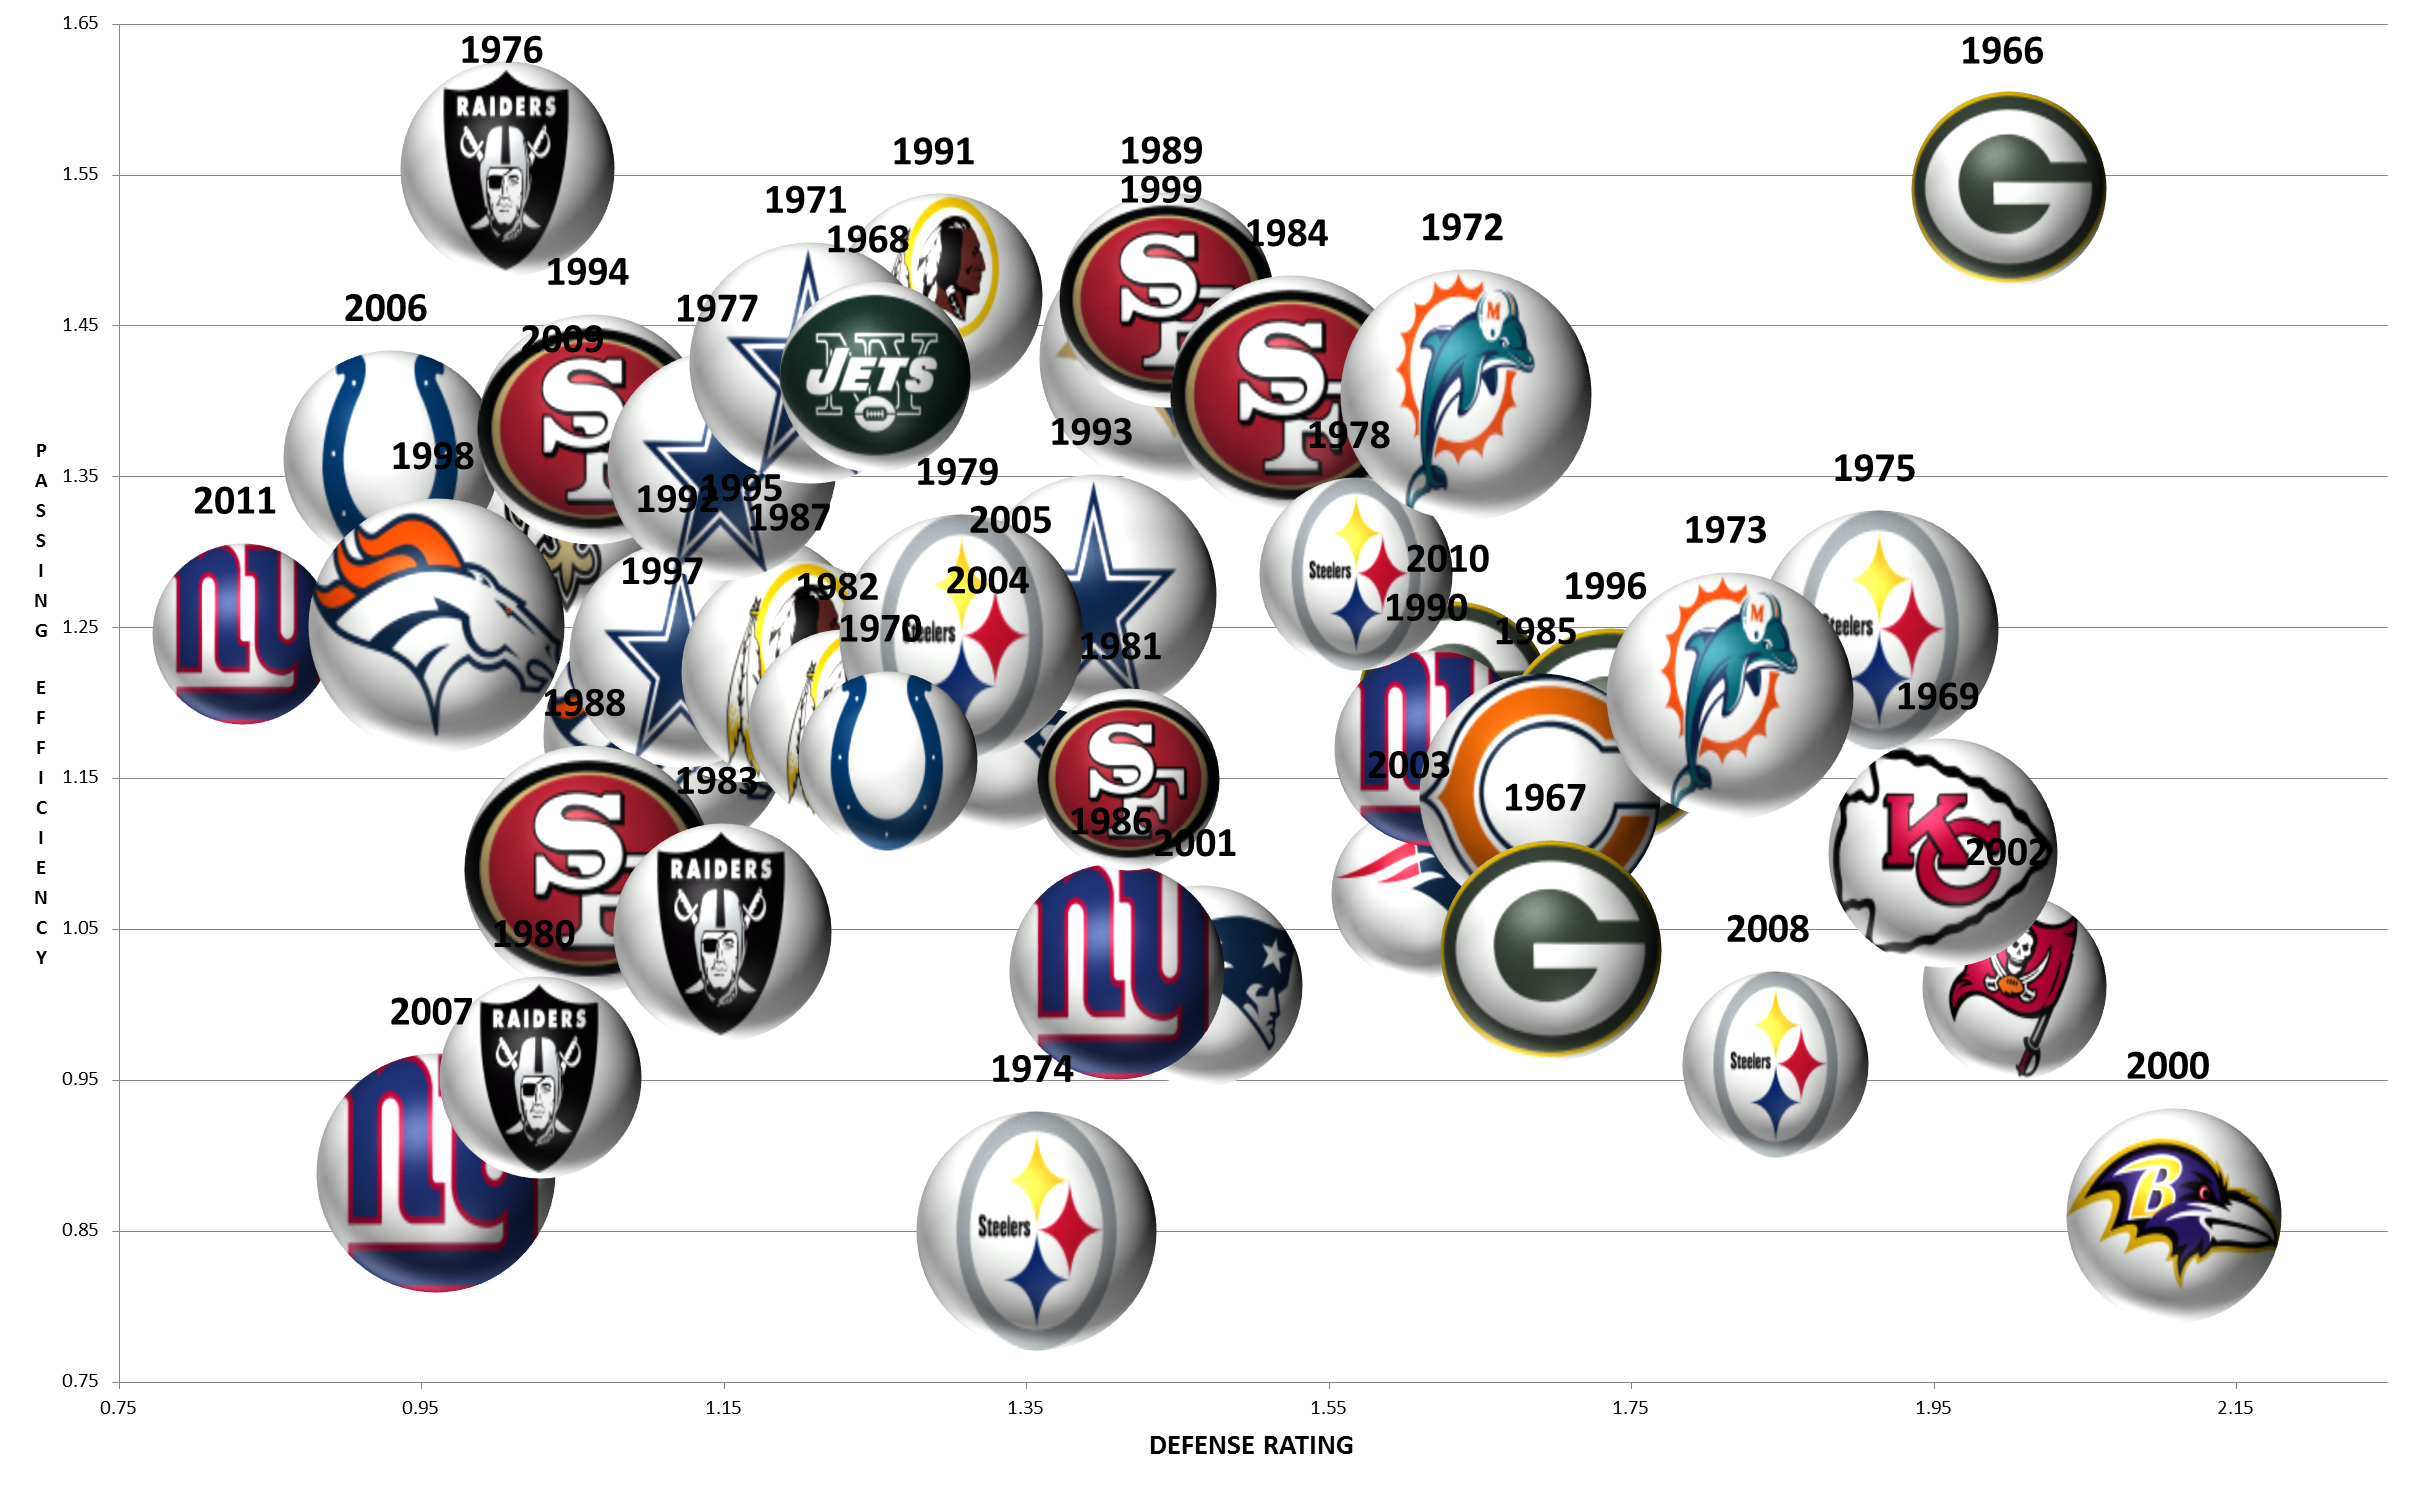 Super Bowl champions and how they passed, ran and played defense